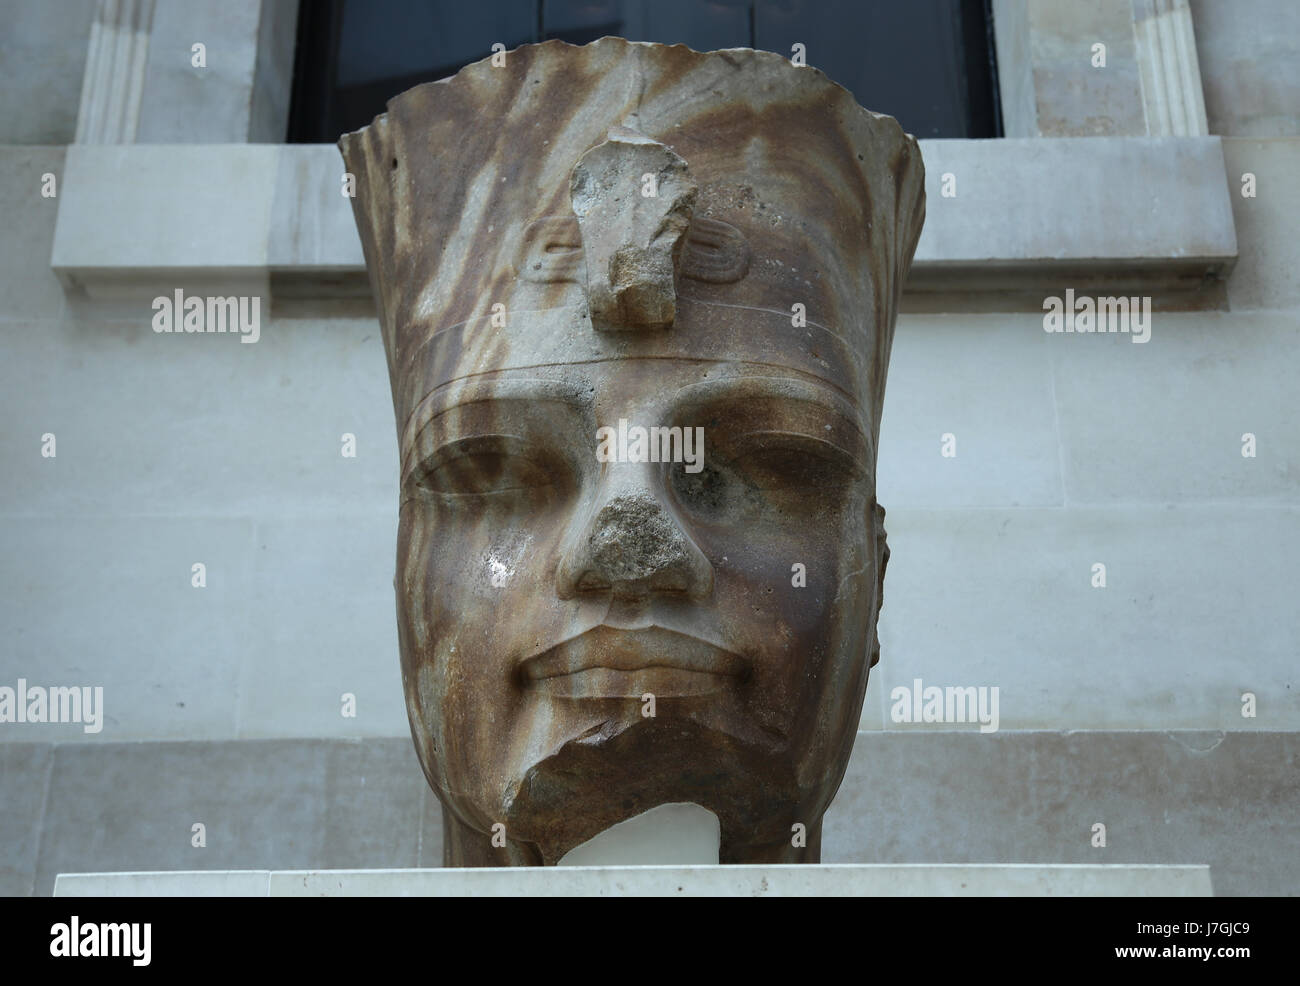 Colossal head of Egyptian pharaoh Amenhotep III. 18th Dynasty, 1400 BC. Thebes. British Museum. London. GBR Stock Photo